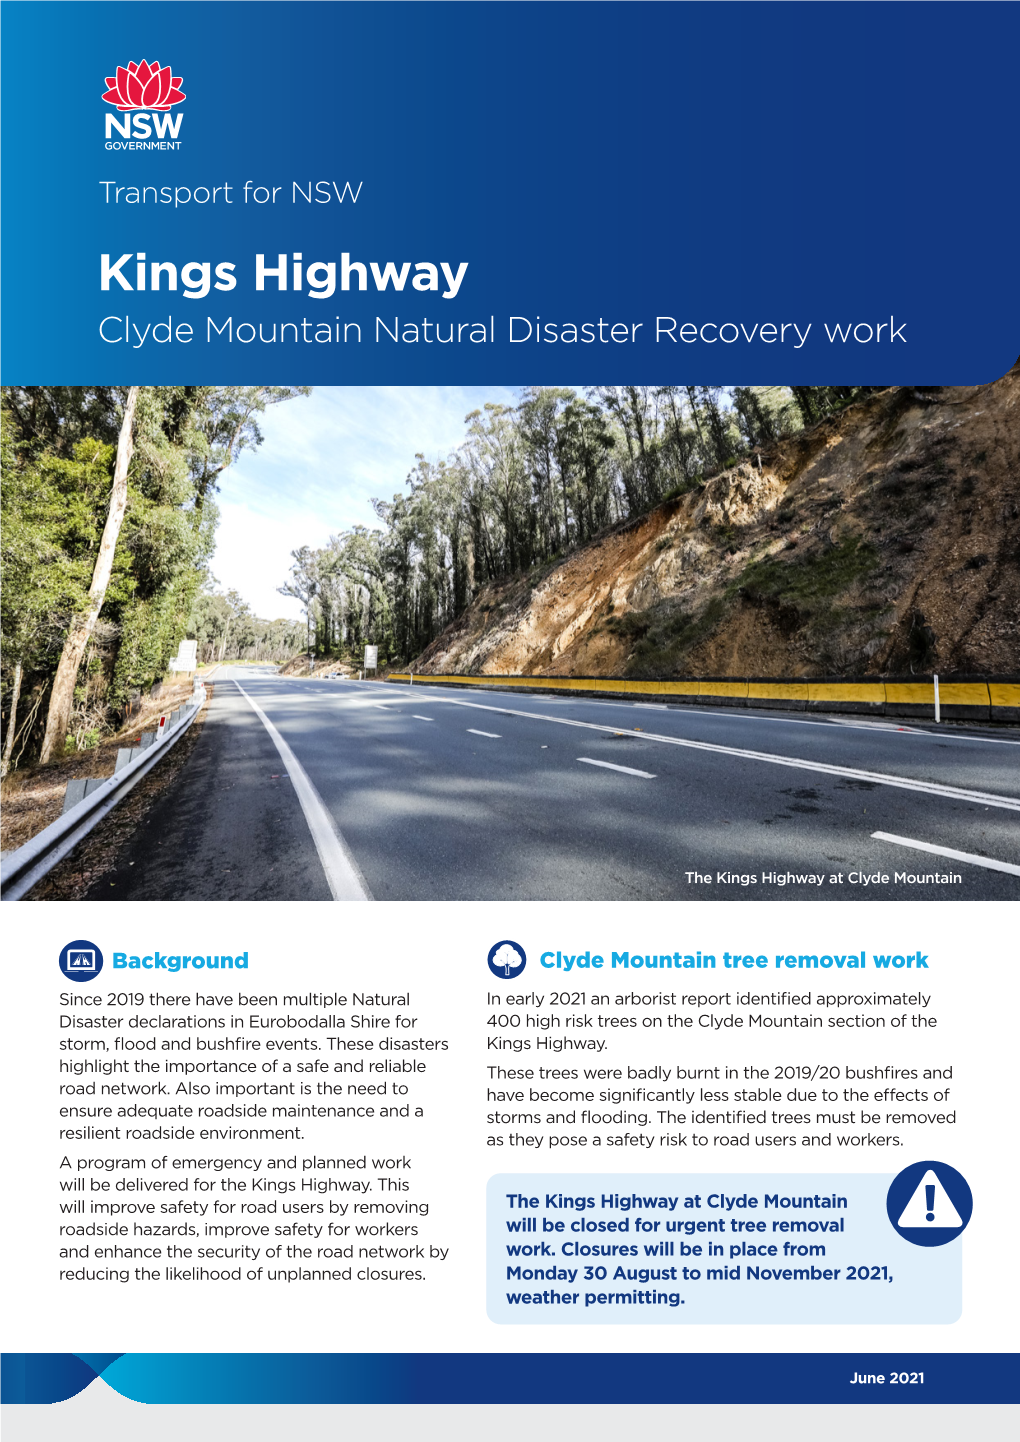 Kings Highway Clyde Mountain Natural Disaster Recovery Work